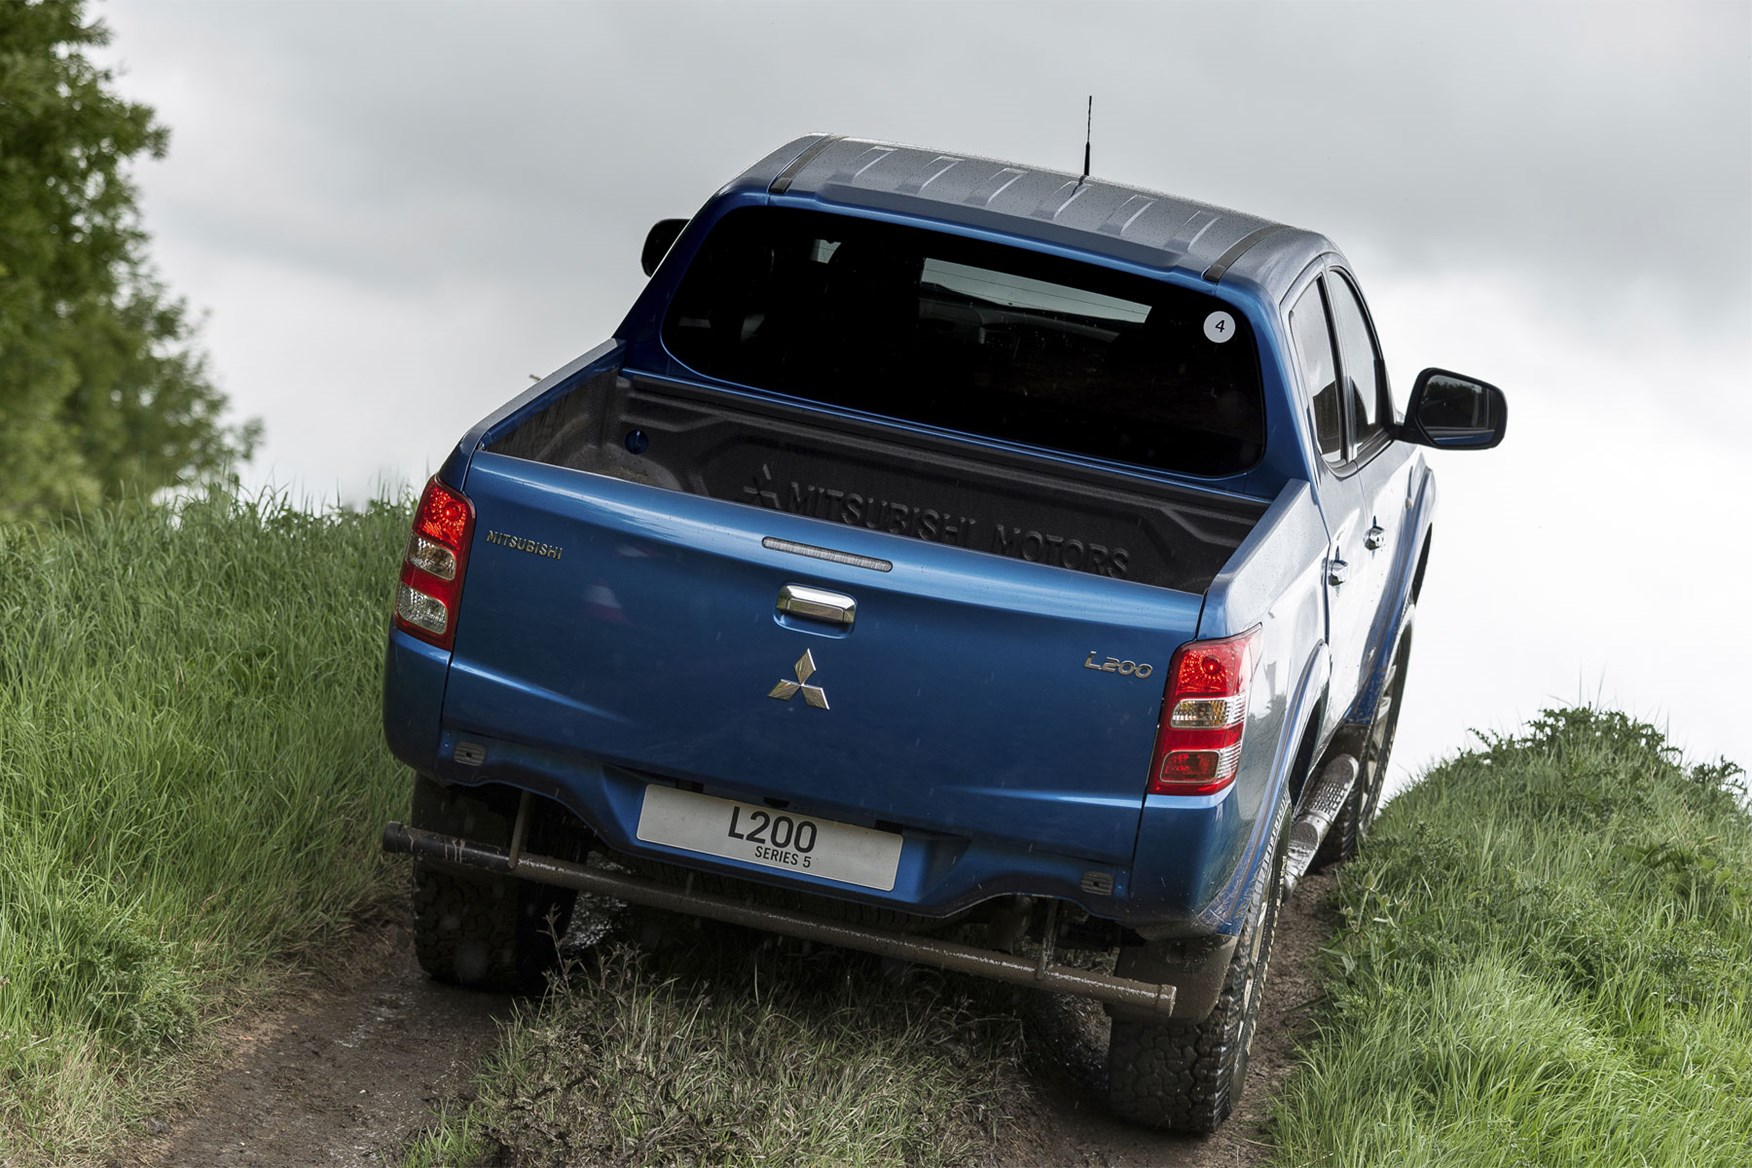 Mitsubishi L200 review, blue, driving off road, rear view